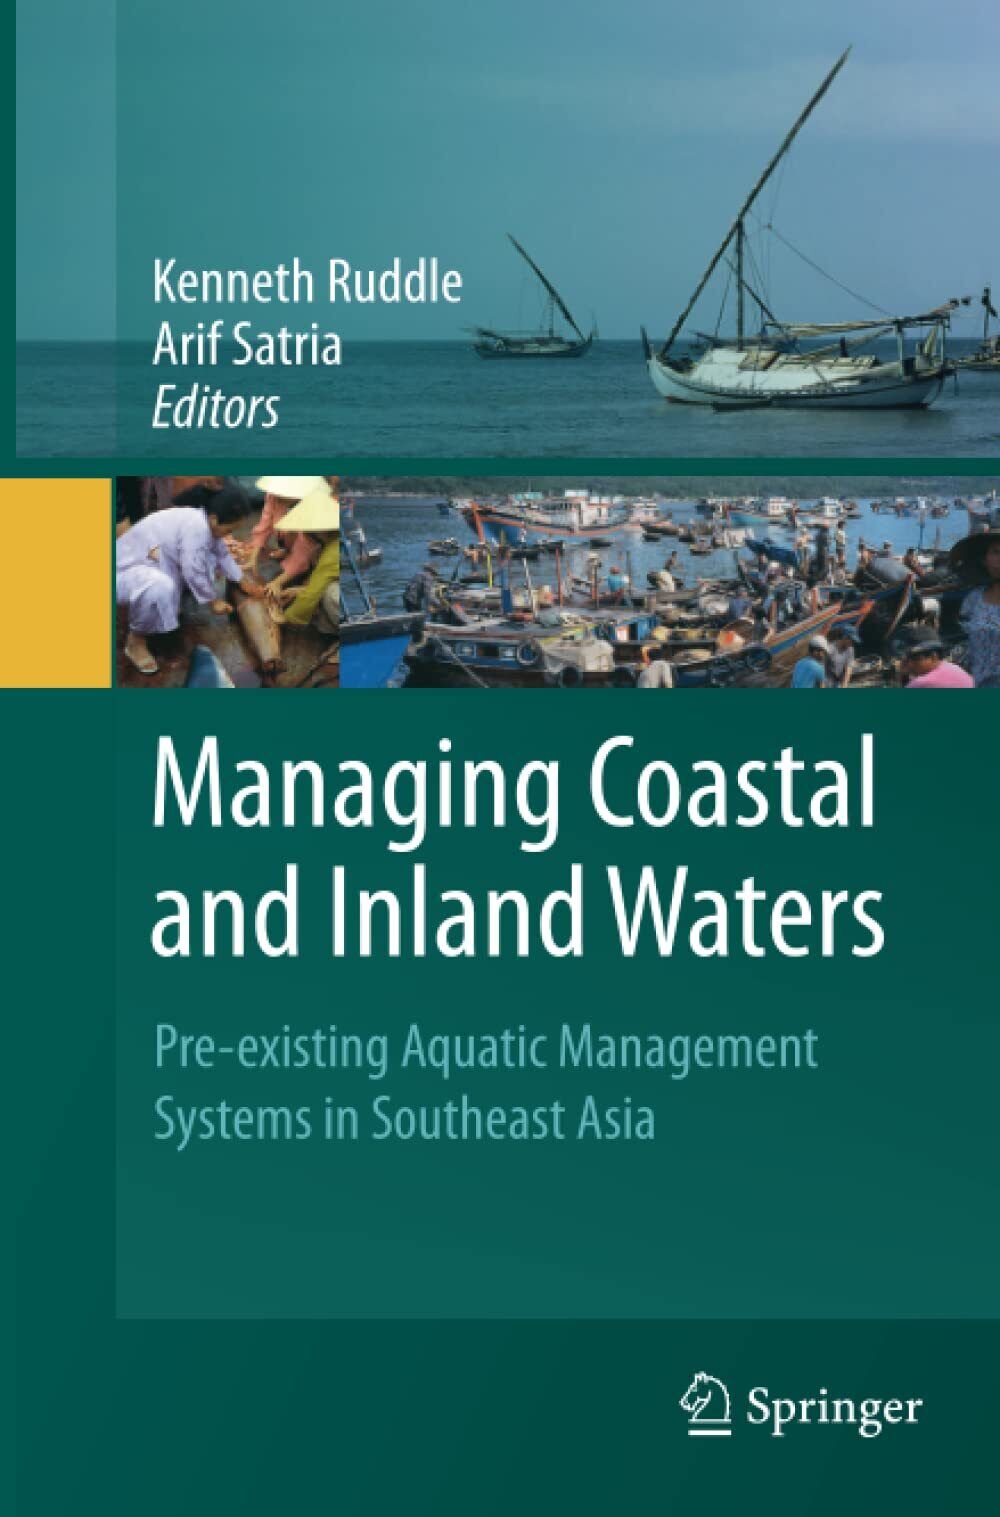 Managing Coastal and Inland Waters - Kenneth Ruddle - Springer, 2014